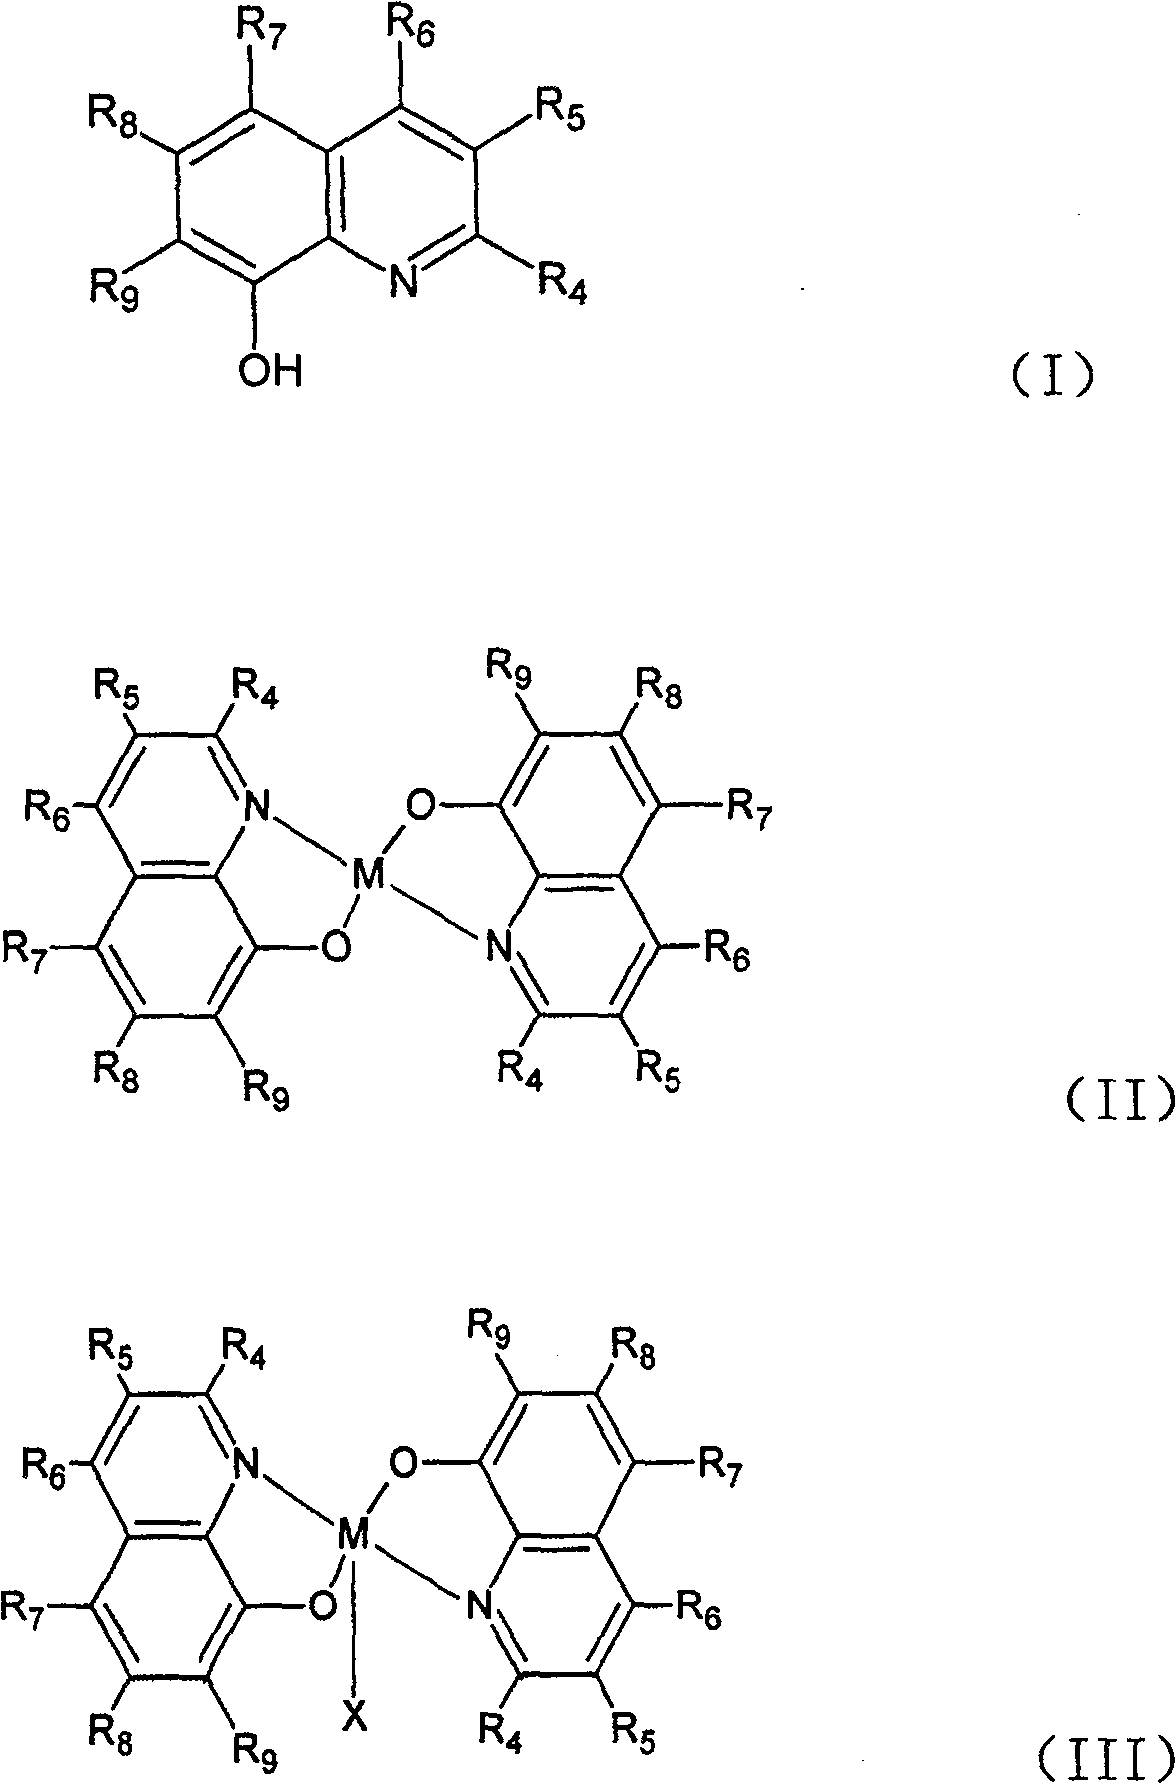 Manganese catalyst of 8-hydroxy quinoline derivative and its uses in olefin epoxidation